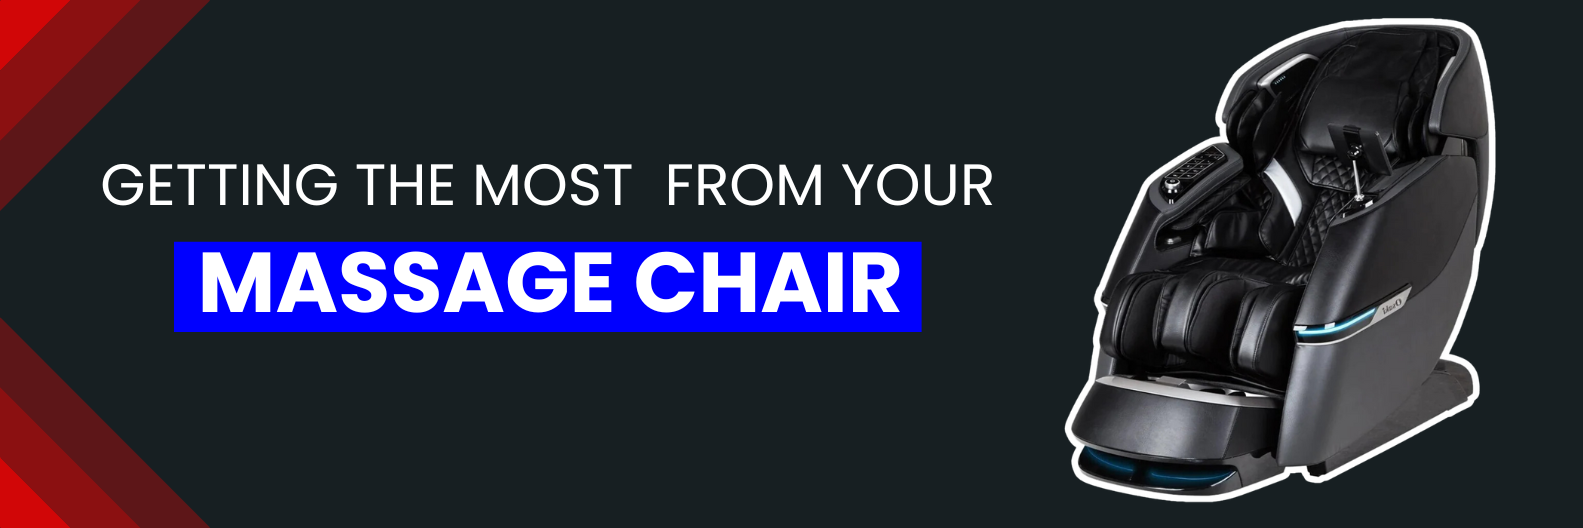 Improve your massage chair experience with professional advice and strategies. Discover the complete advantages of your massage chair for peak relaxation and renewal.